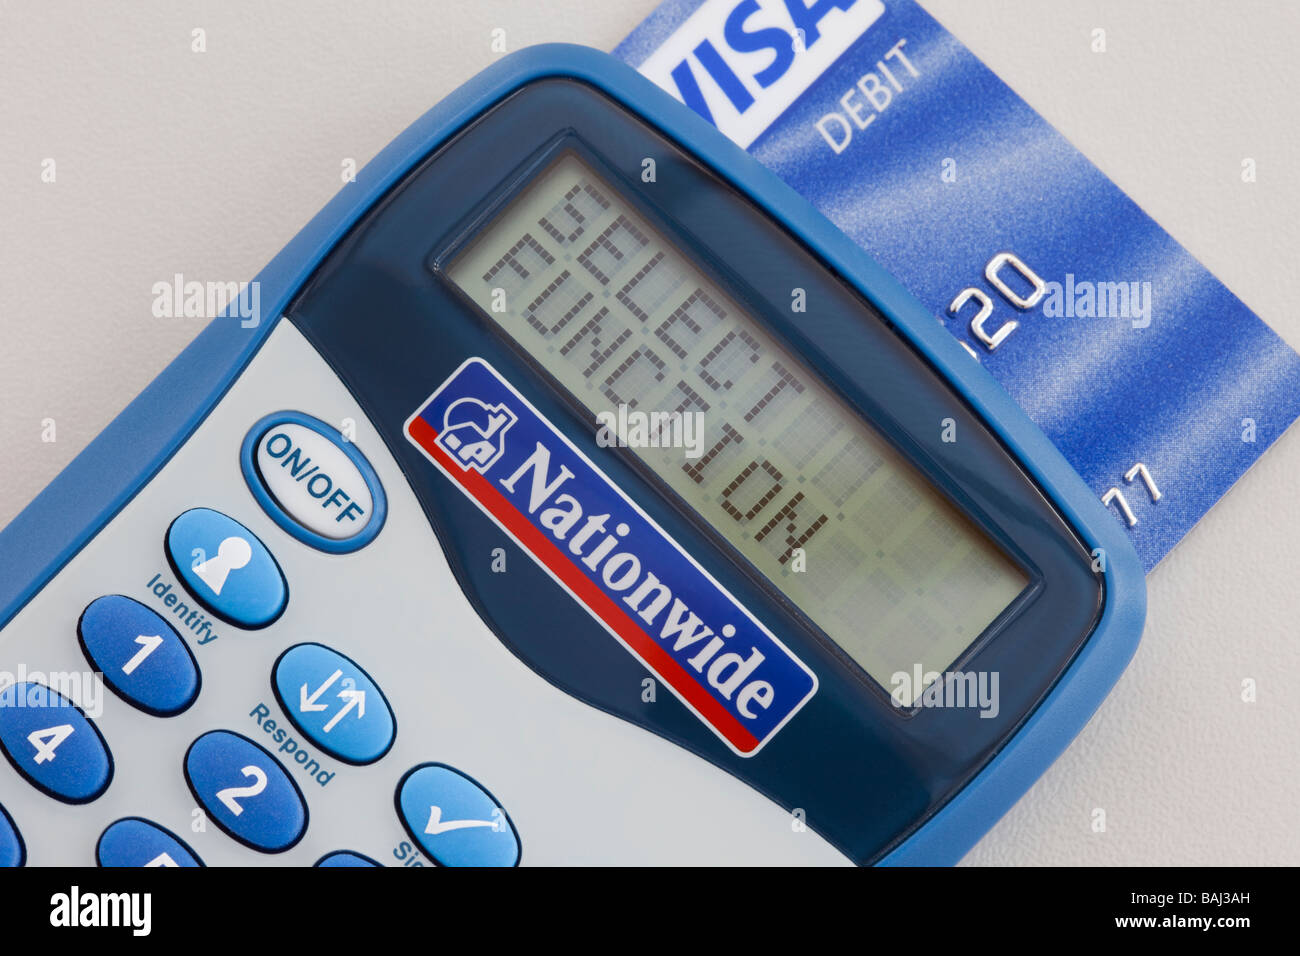 Close up of Nationwide bank card reader with Visa debit card inserted for secure online transactions and payment with internet banking. UK Stock Photo